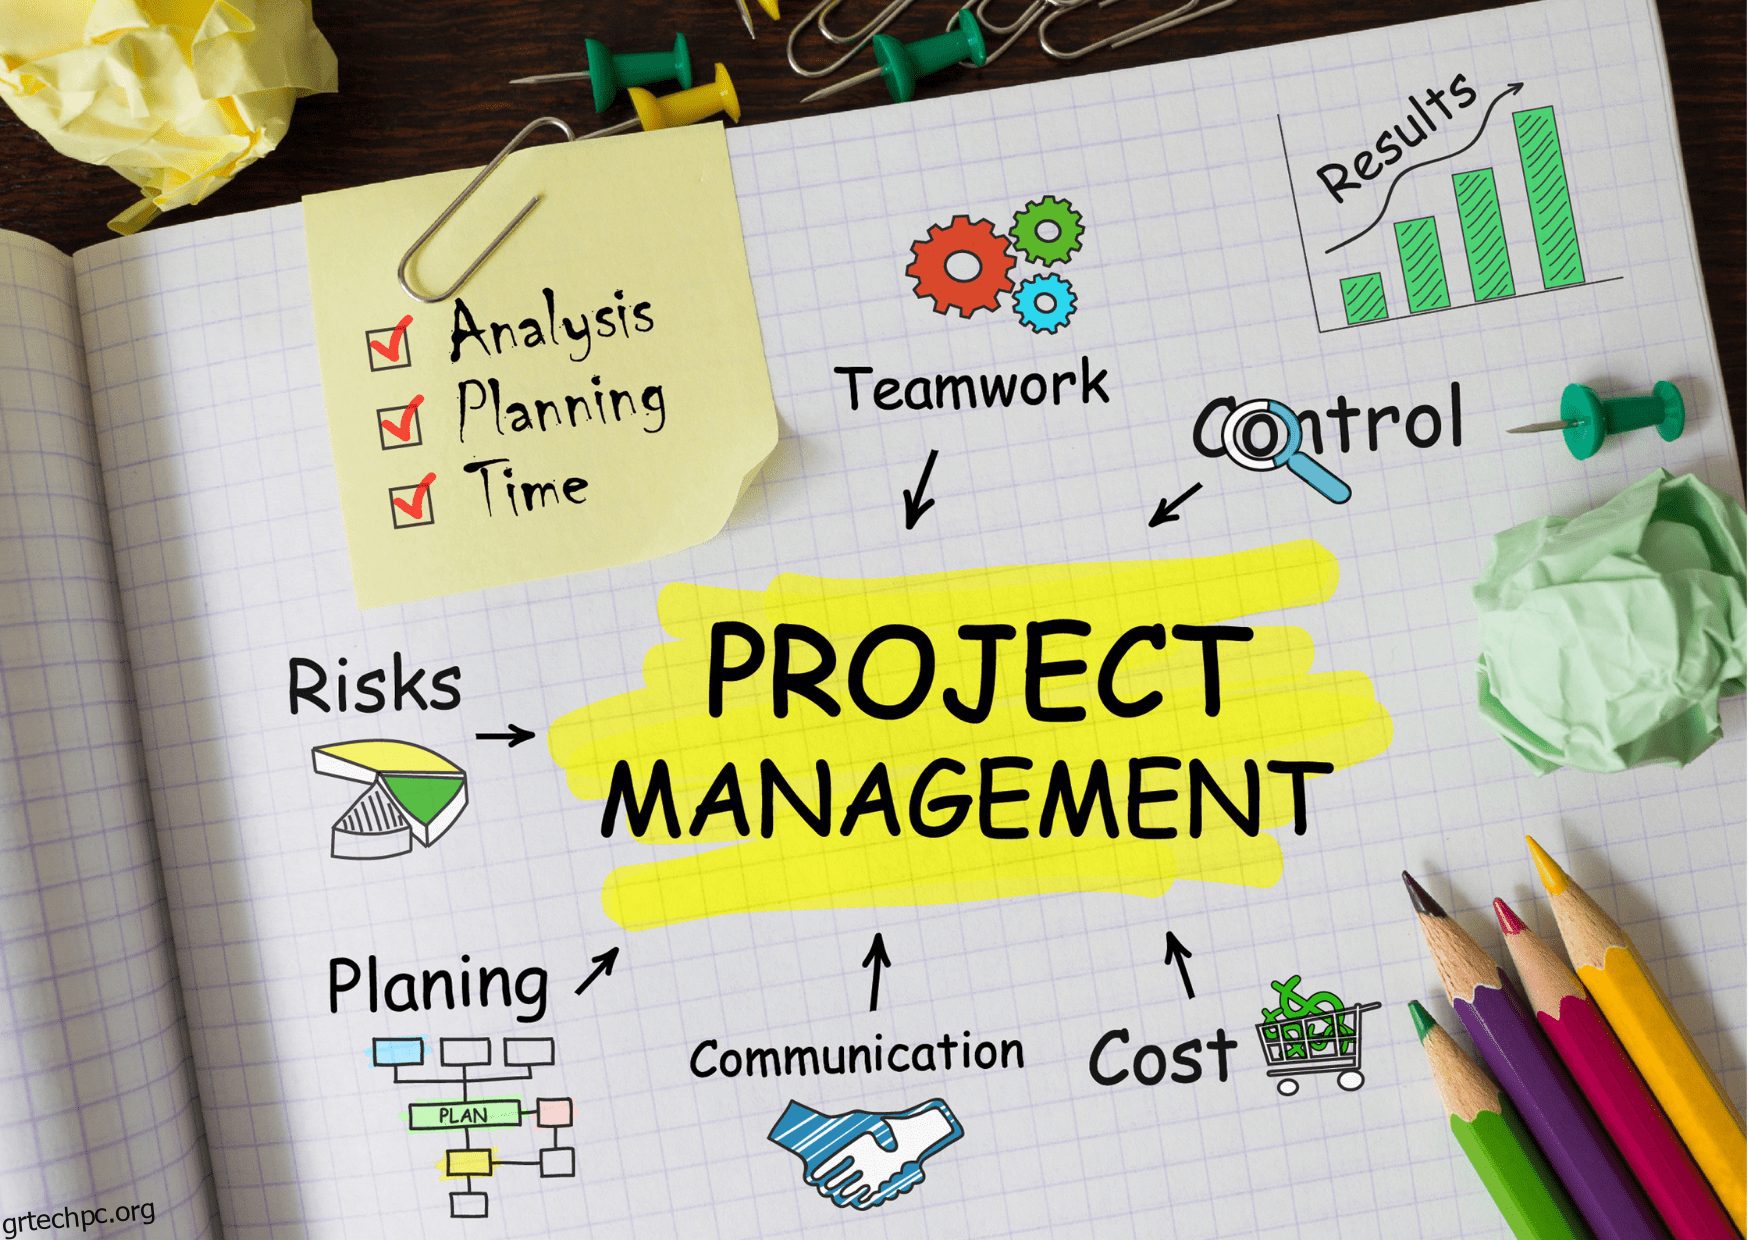 Project Manager vs Resource Manager: Κατανόηση των διαφορών